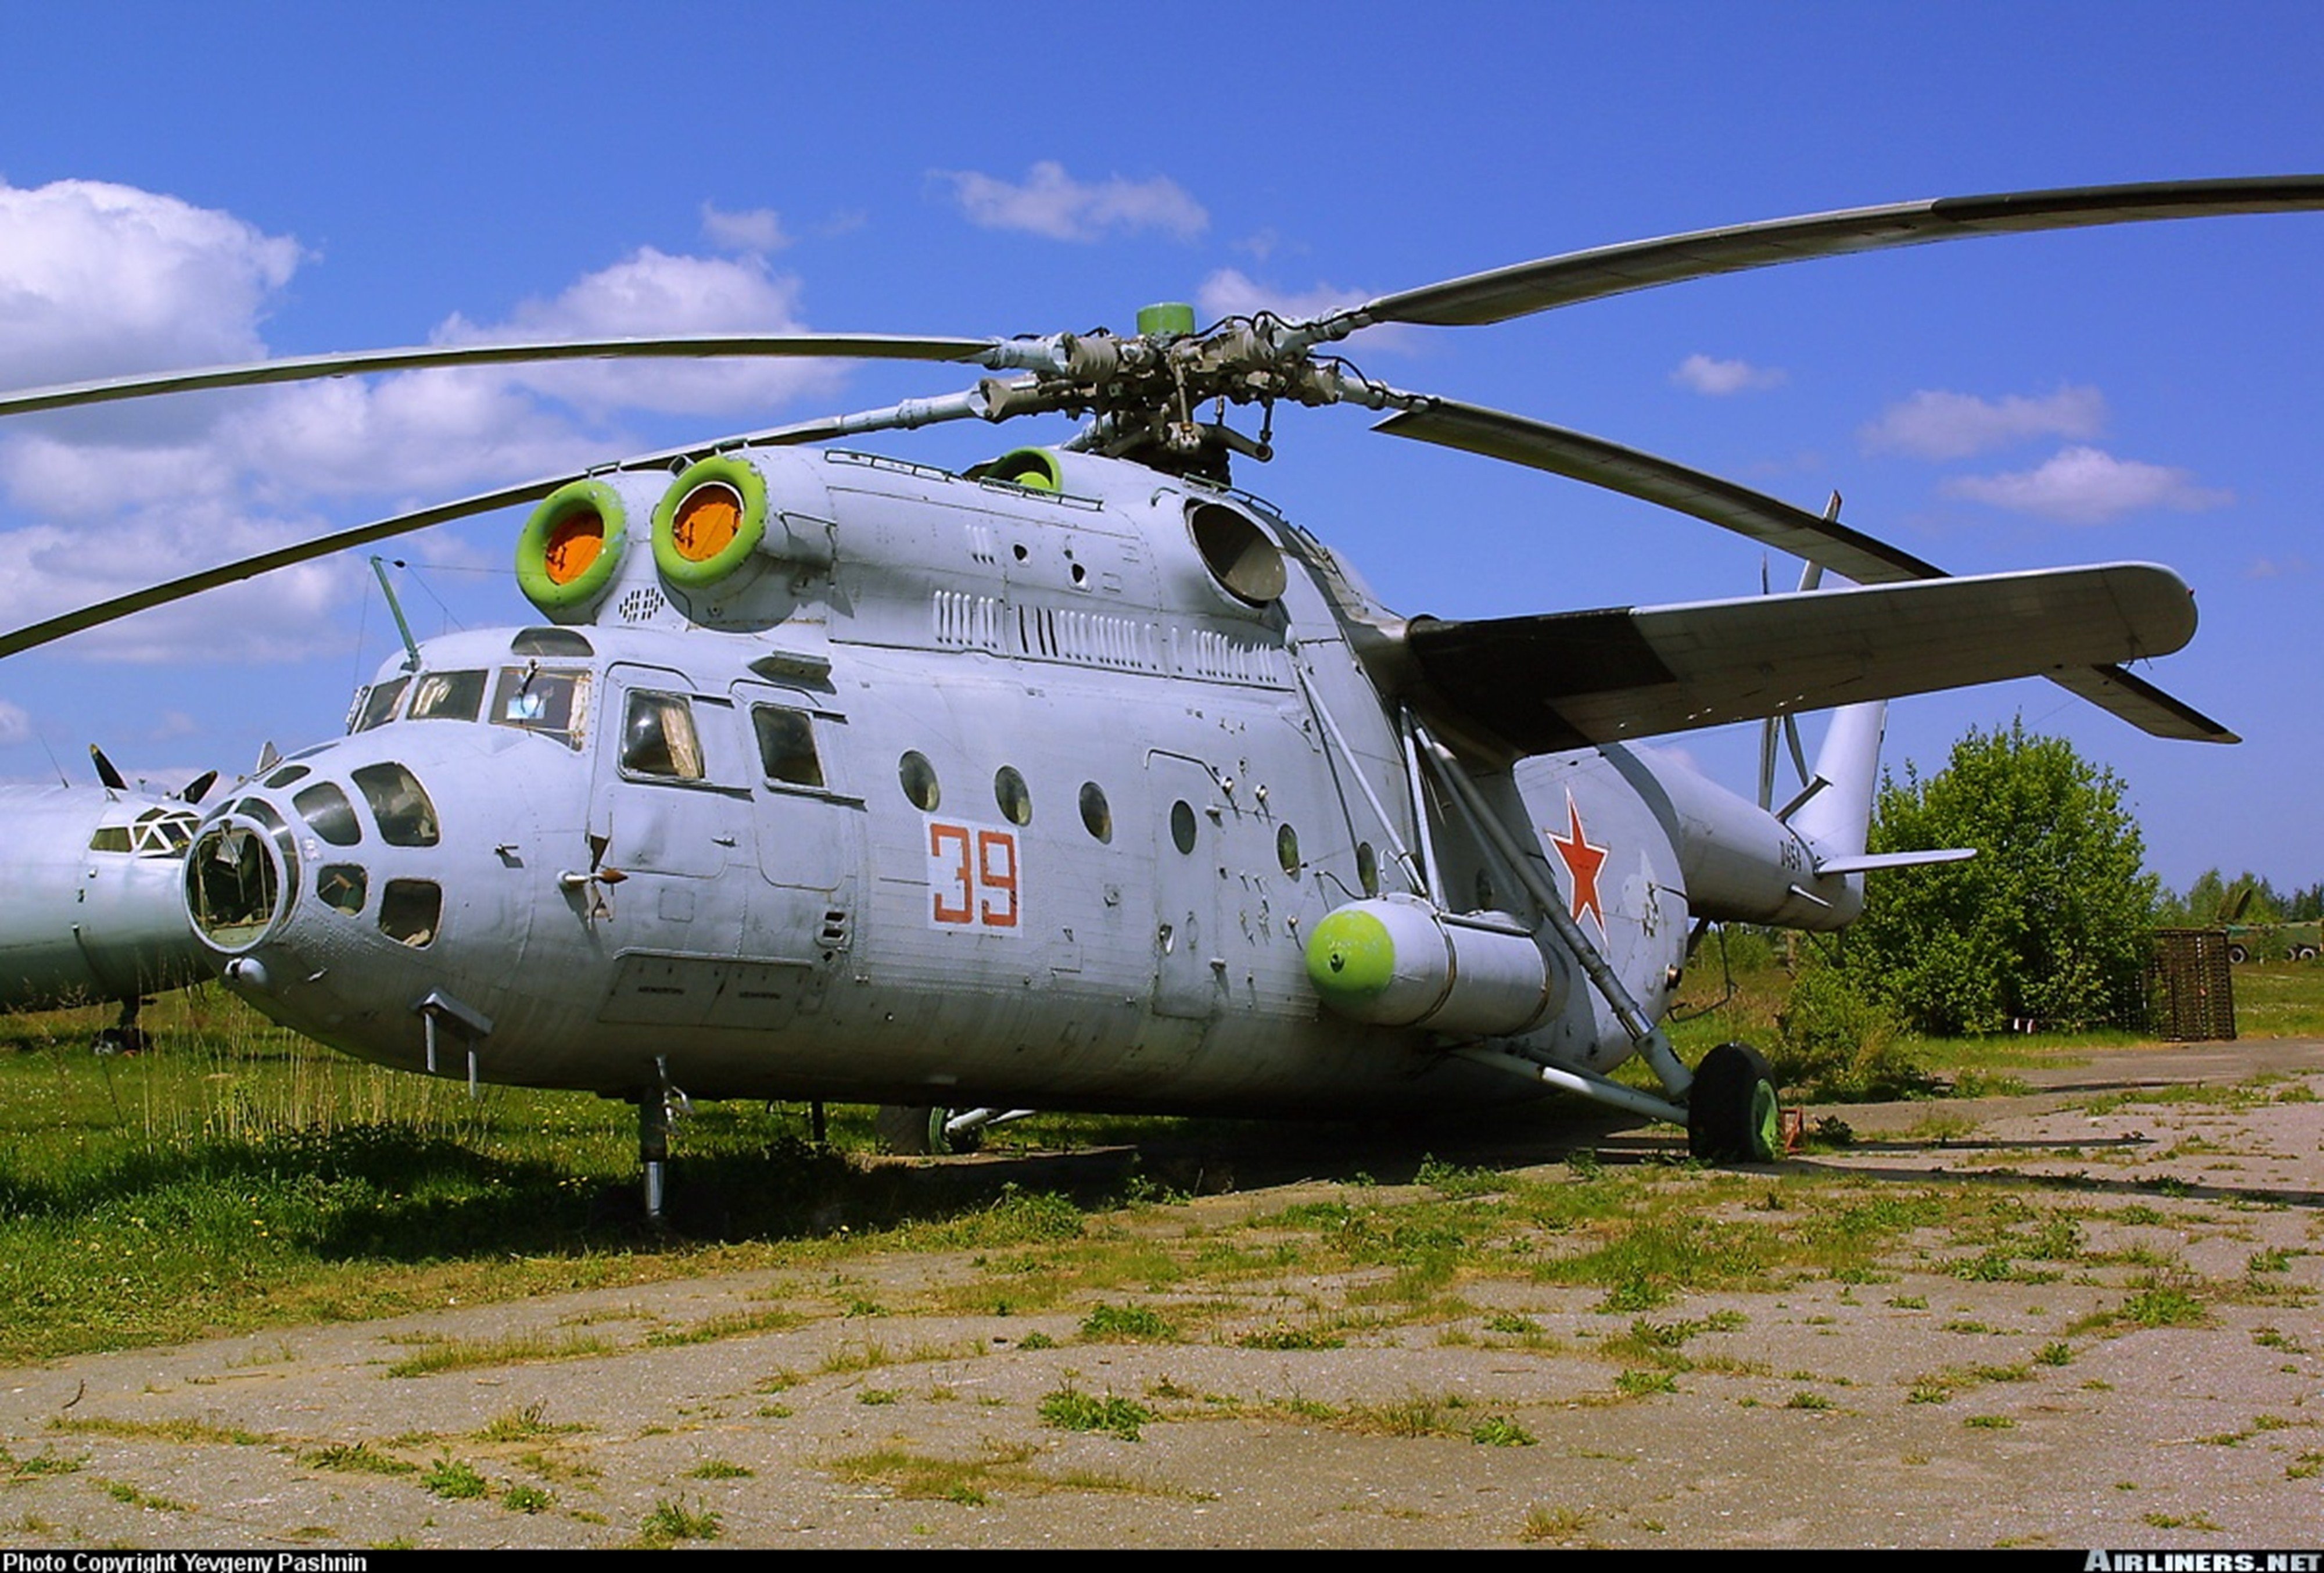 russian, Red, Star, Russia, Helicopter, Aircraft, Military, Cargo, Transport, Mil mi Wallpaper